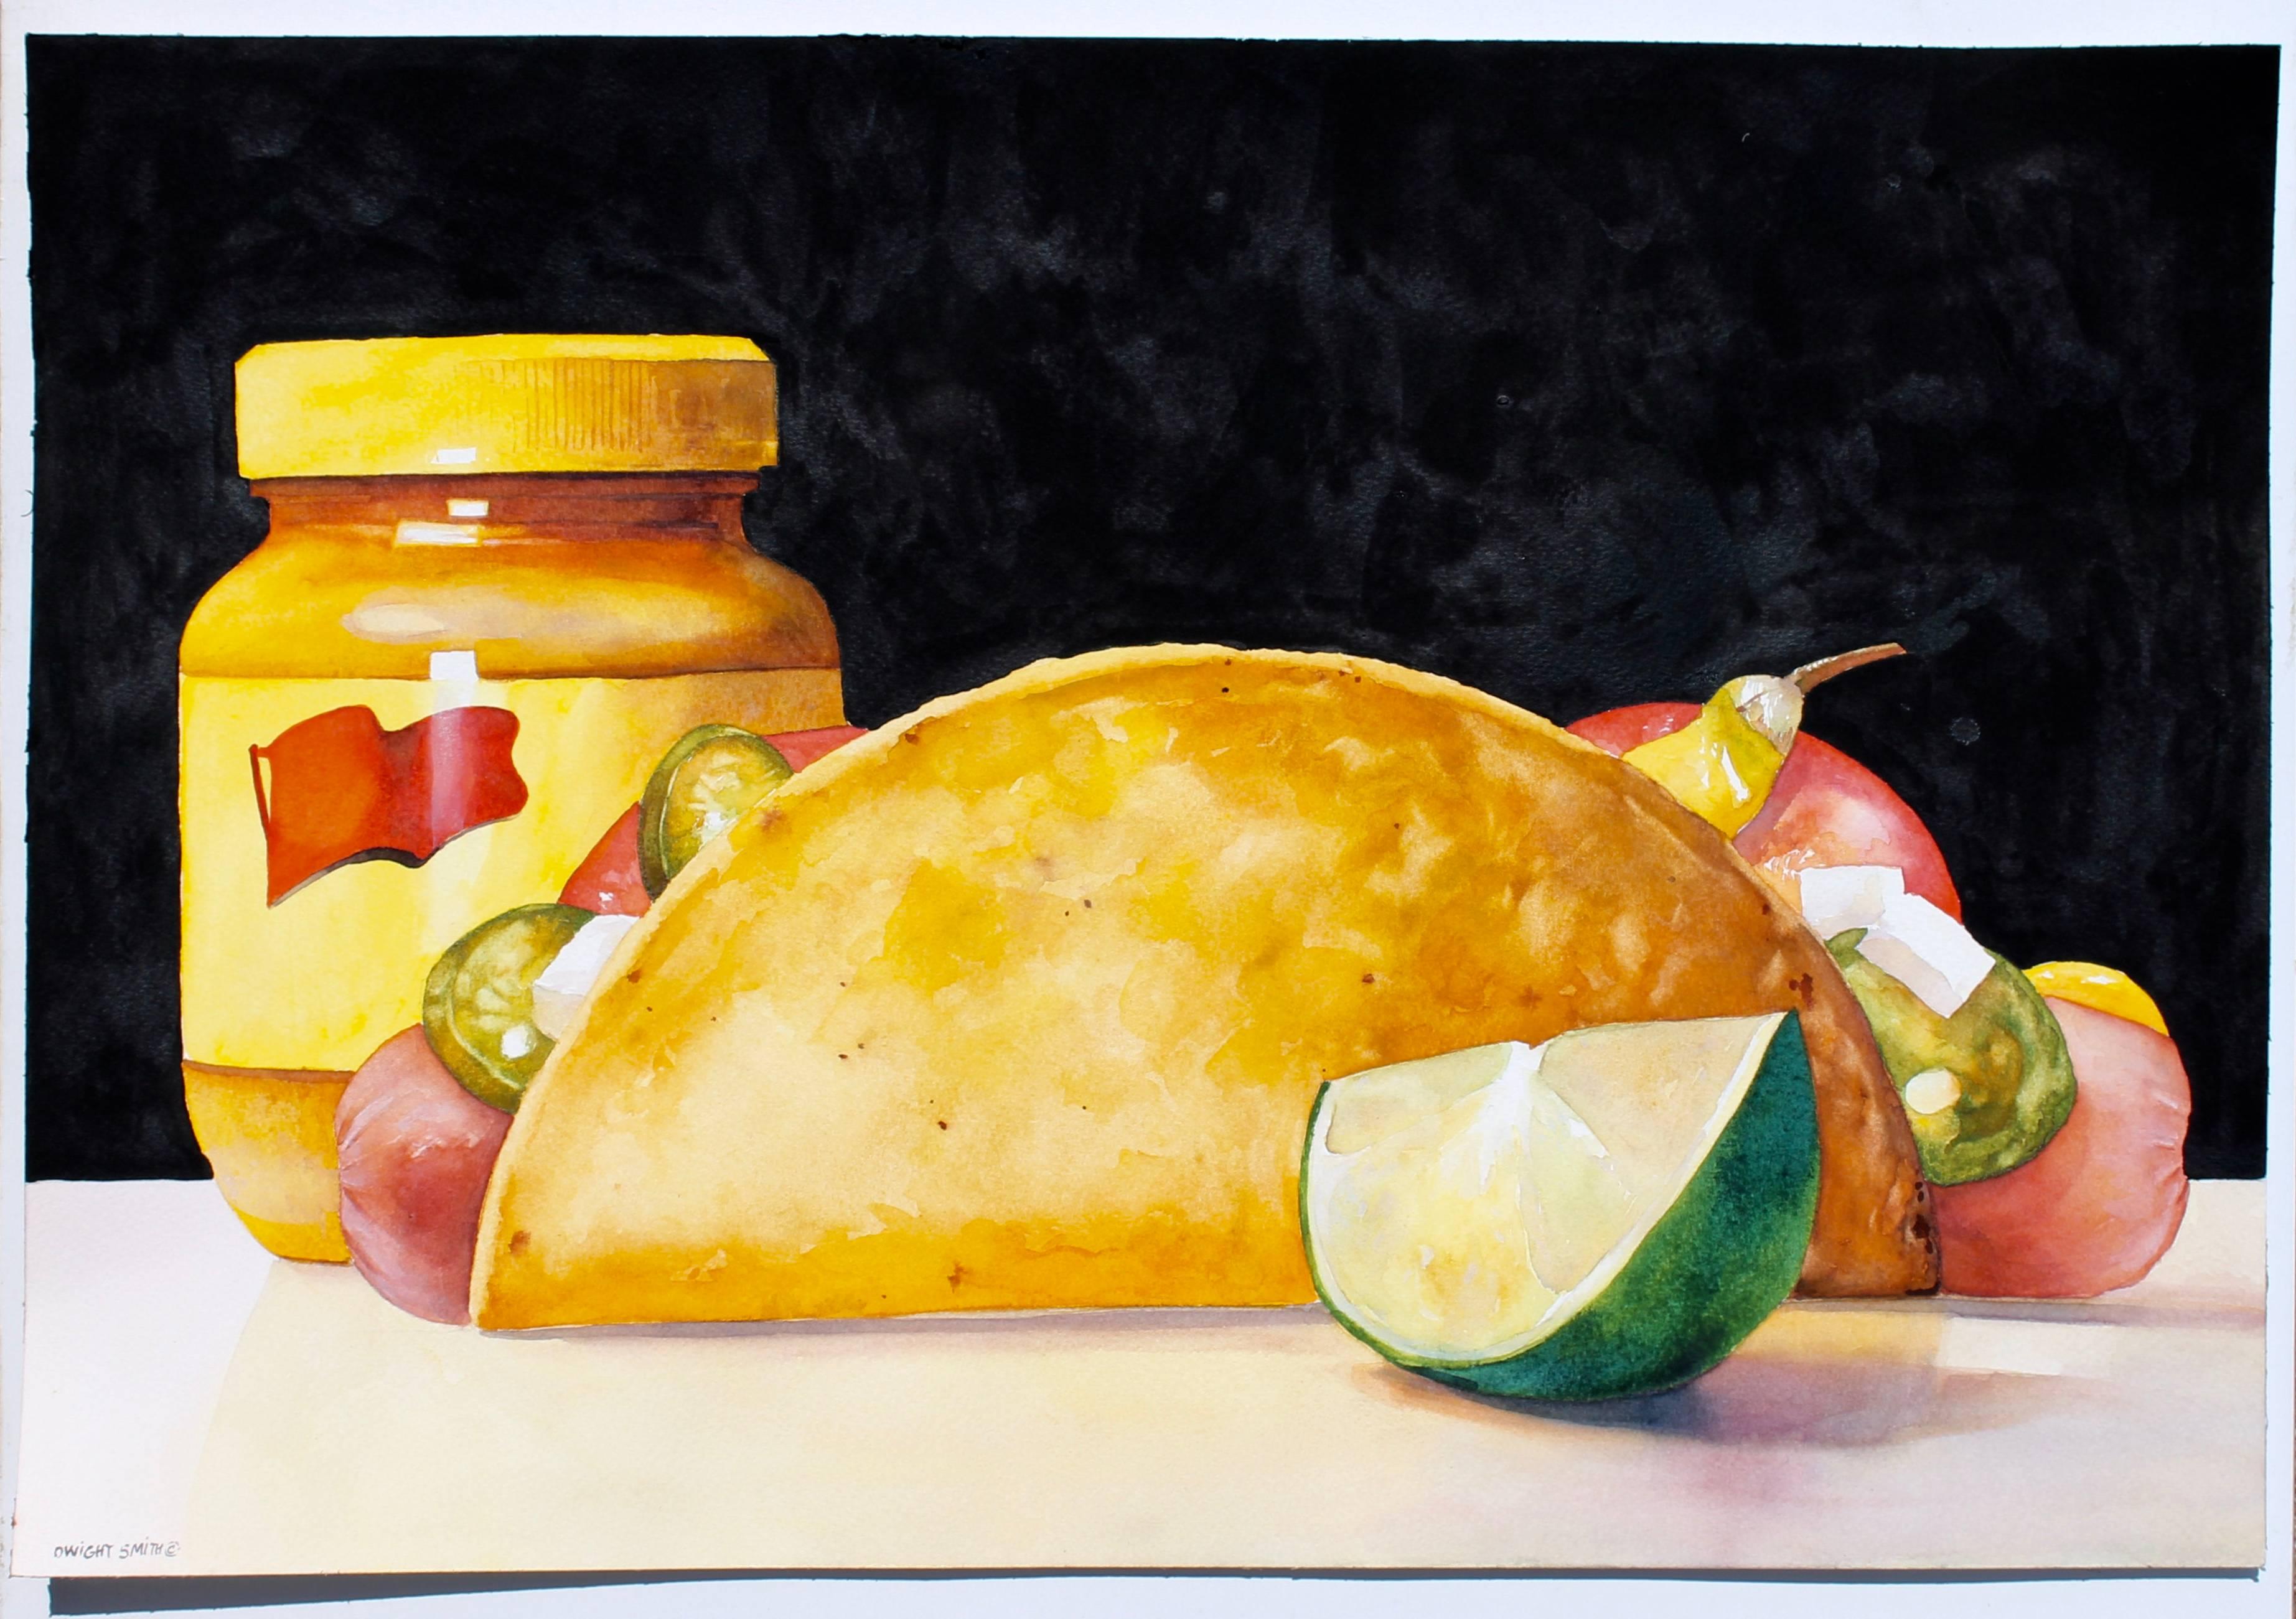 Fusion Cuisine - Realist Art by Dwight Smith